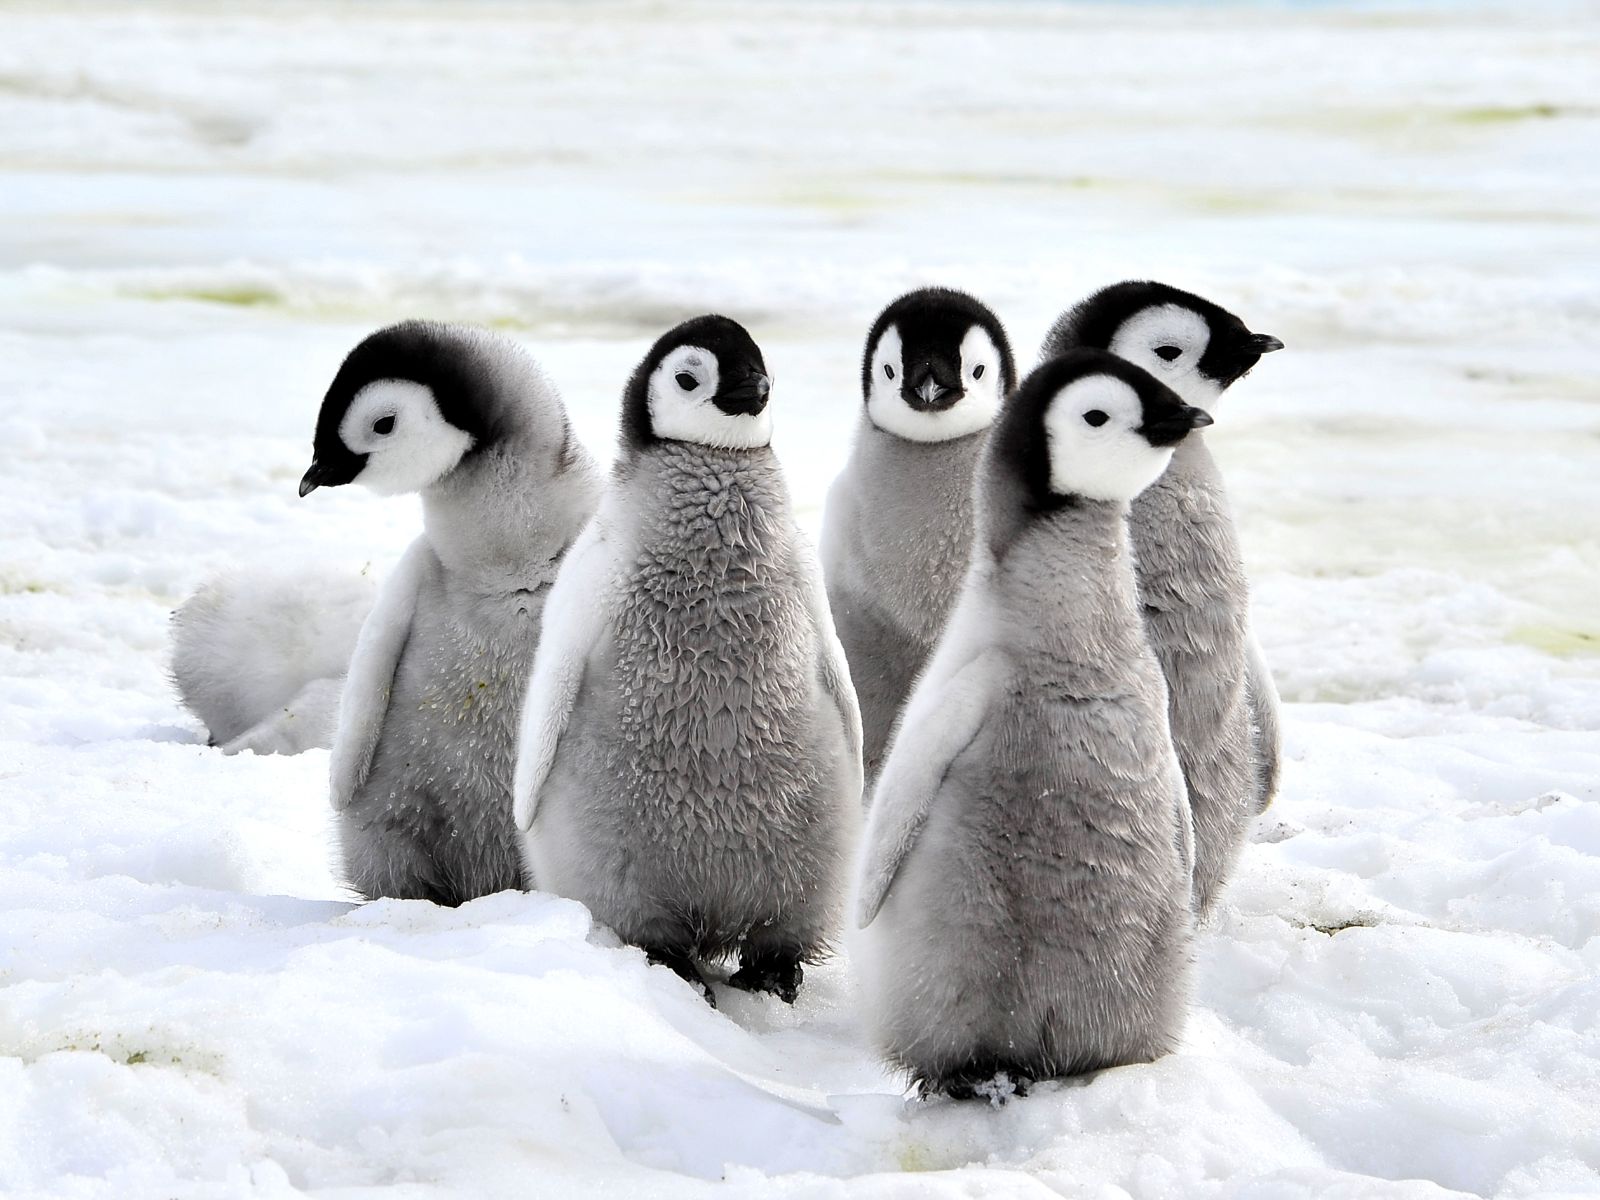 Emperor penguin chicks spotted on an Antarctic expedition